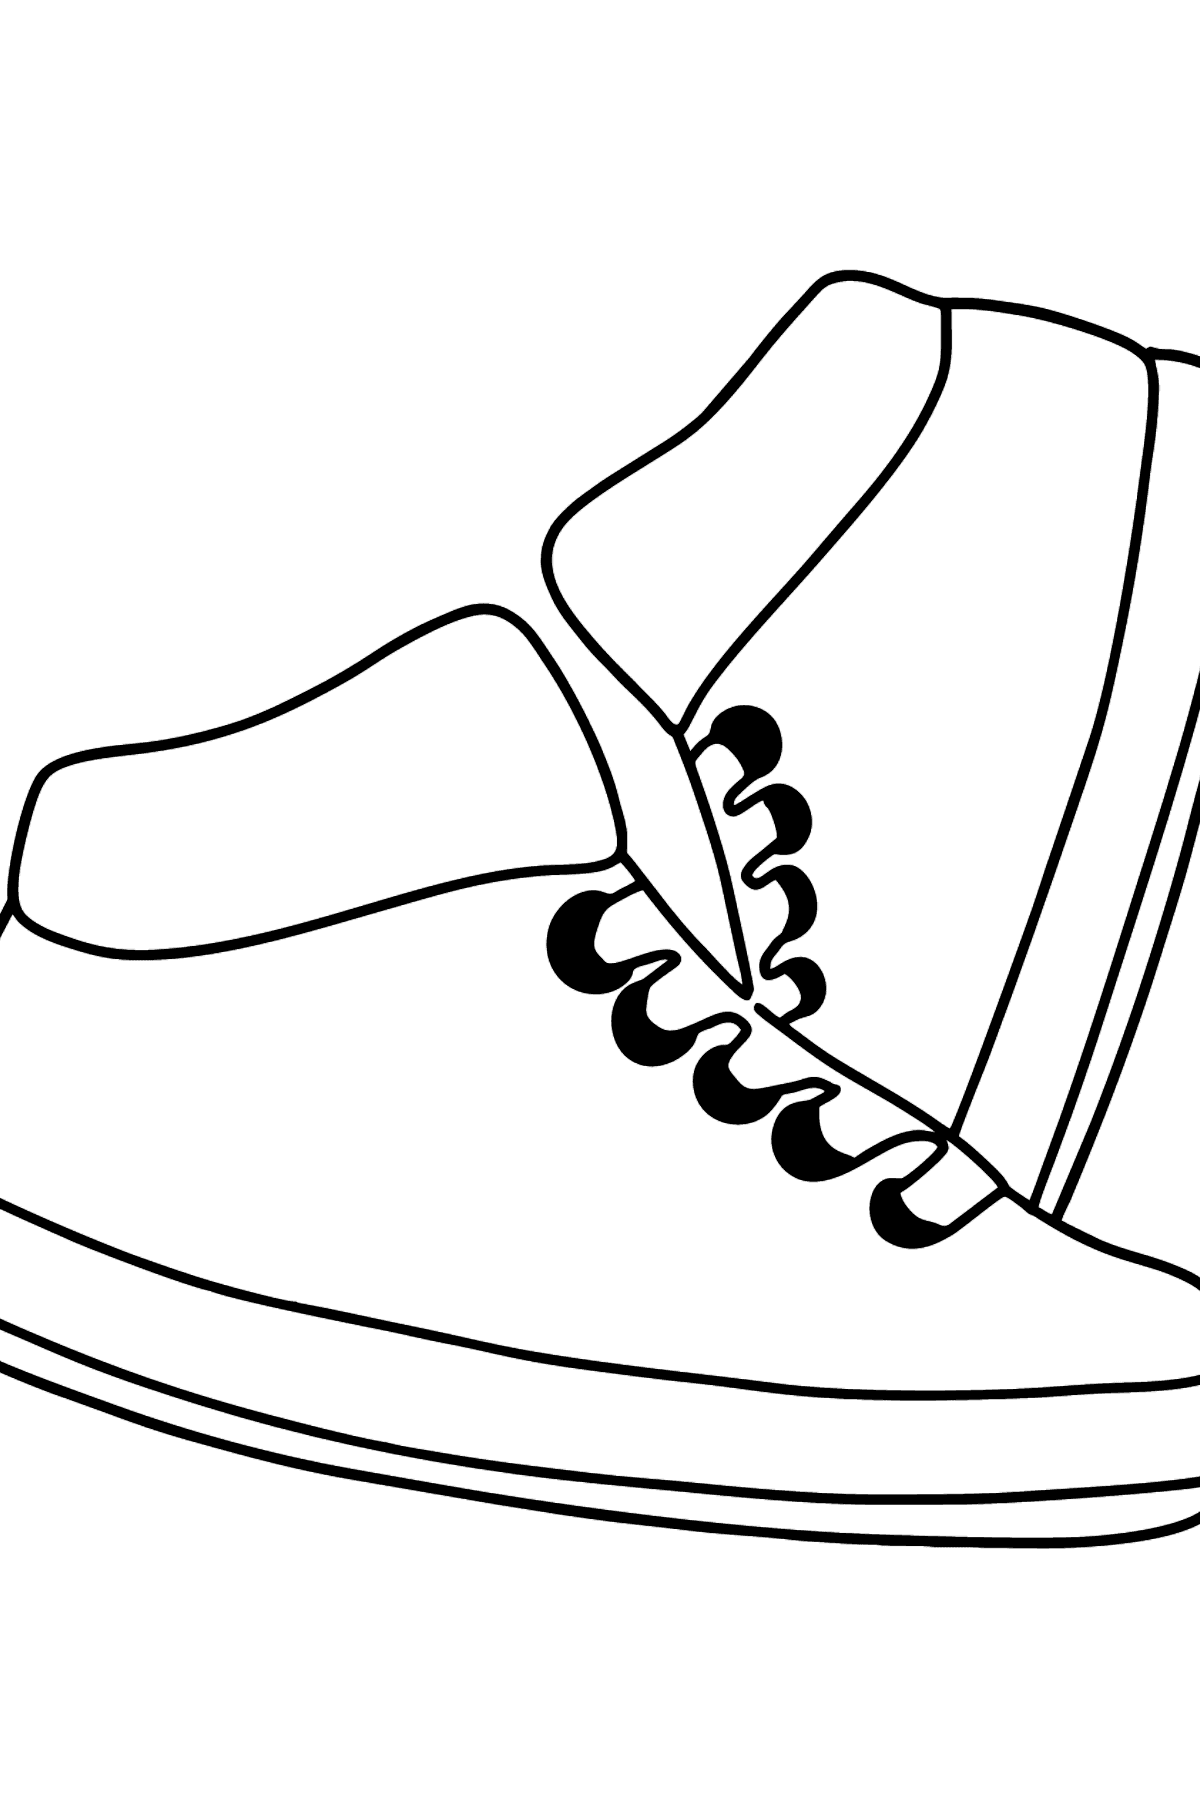 Beautiful Sneakers coloring page - Coloring Pages for Kids